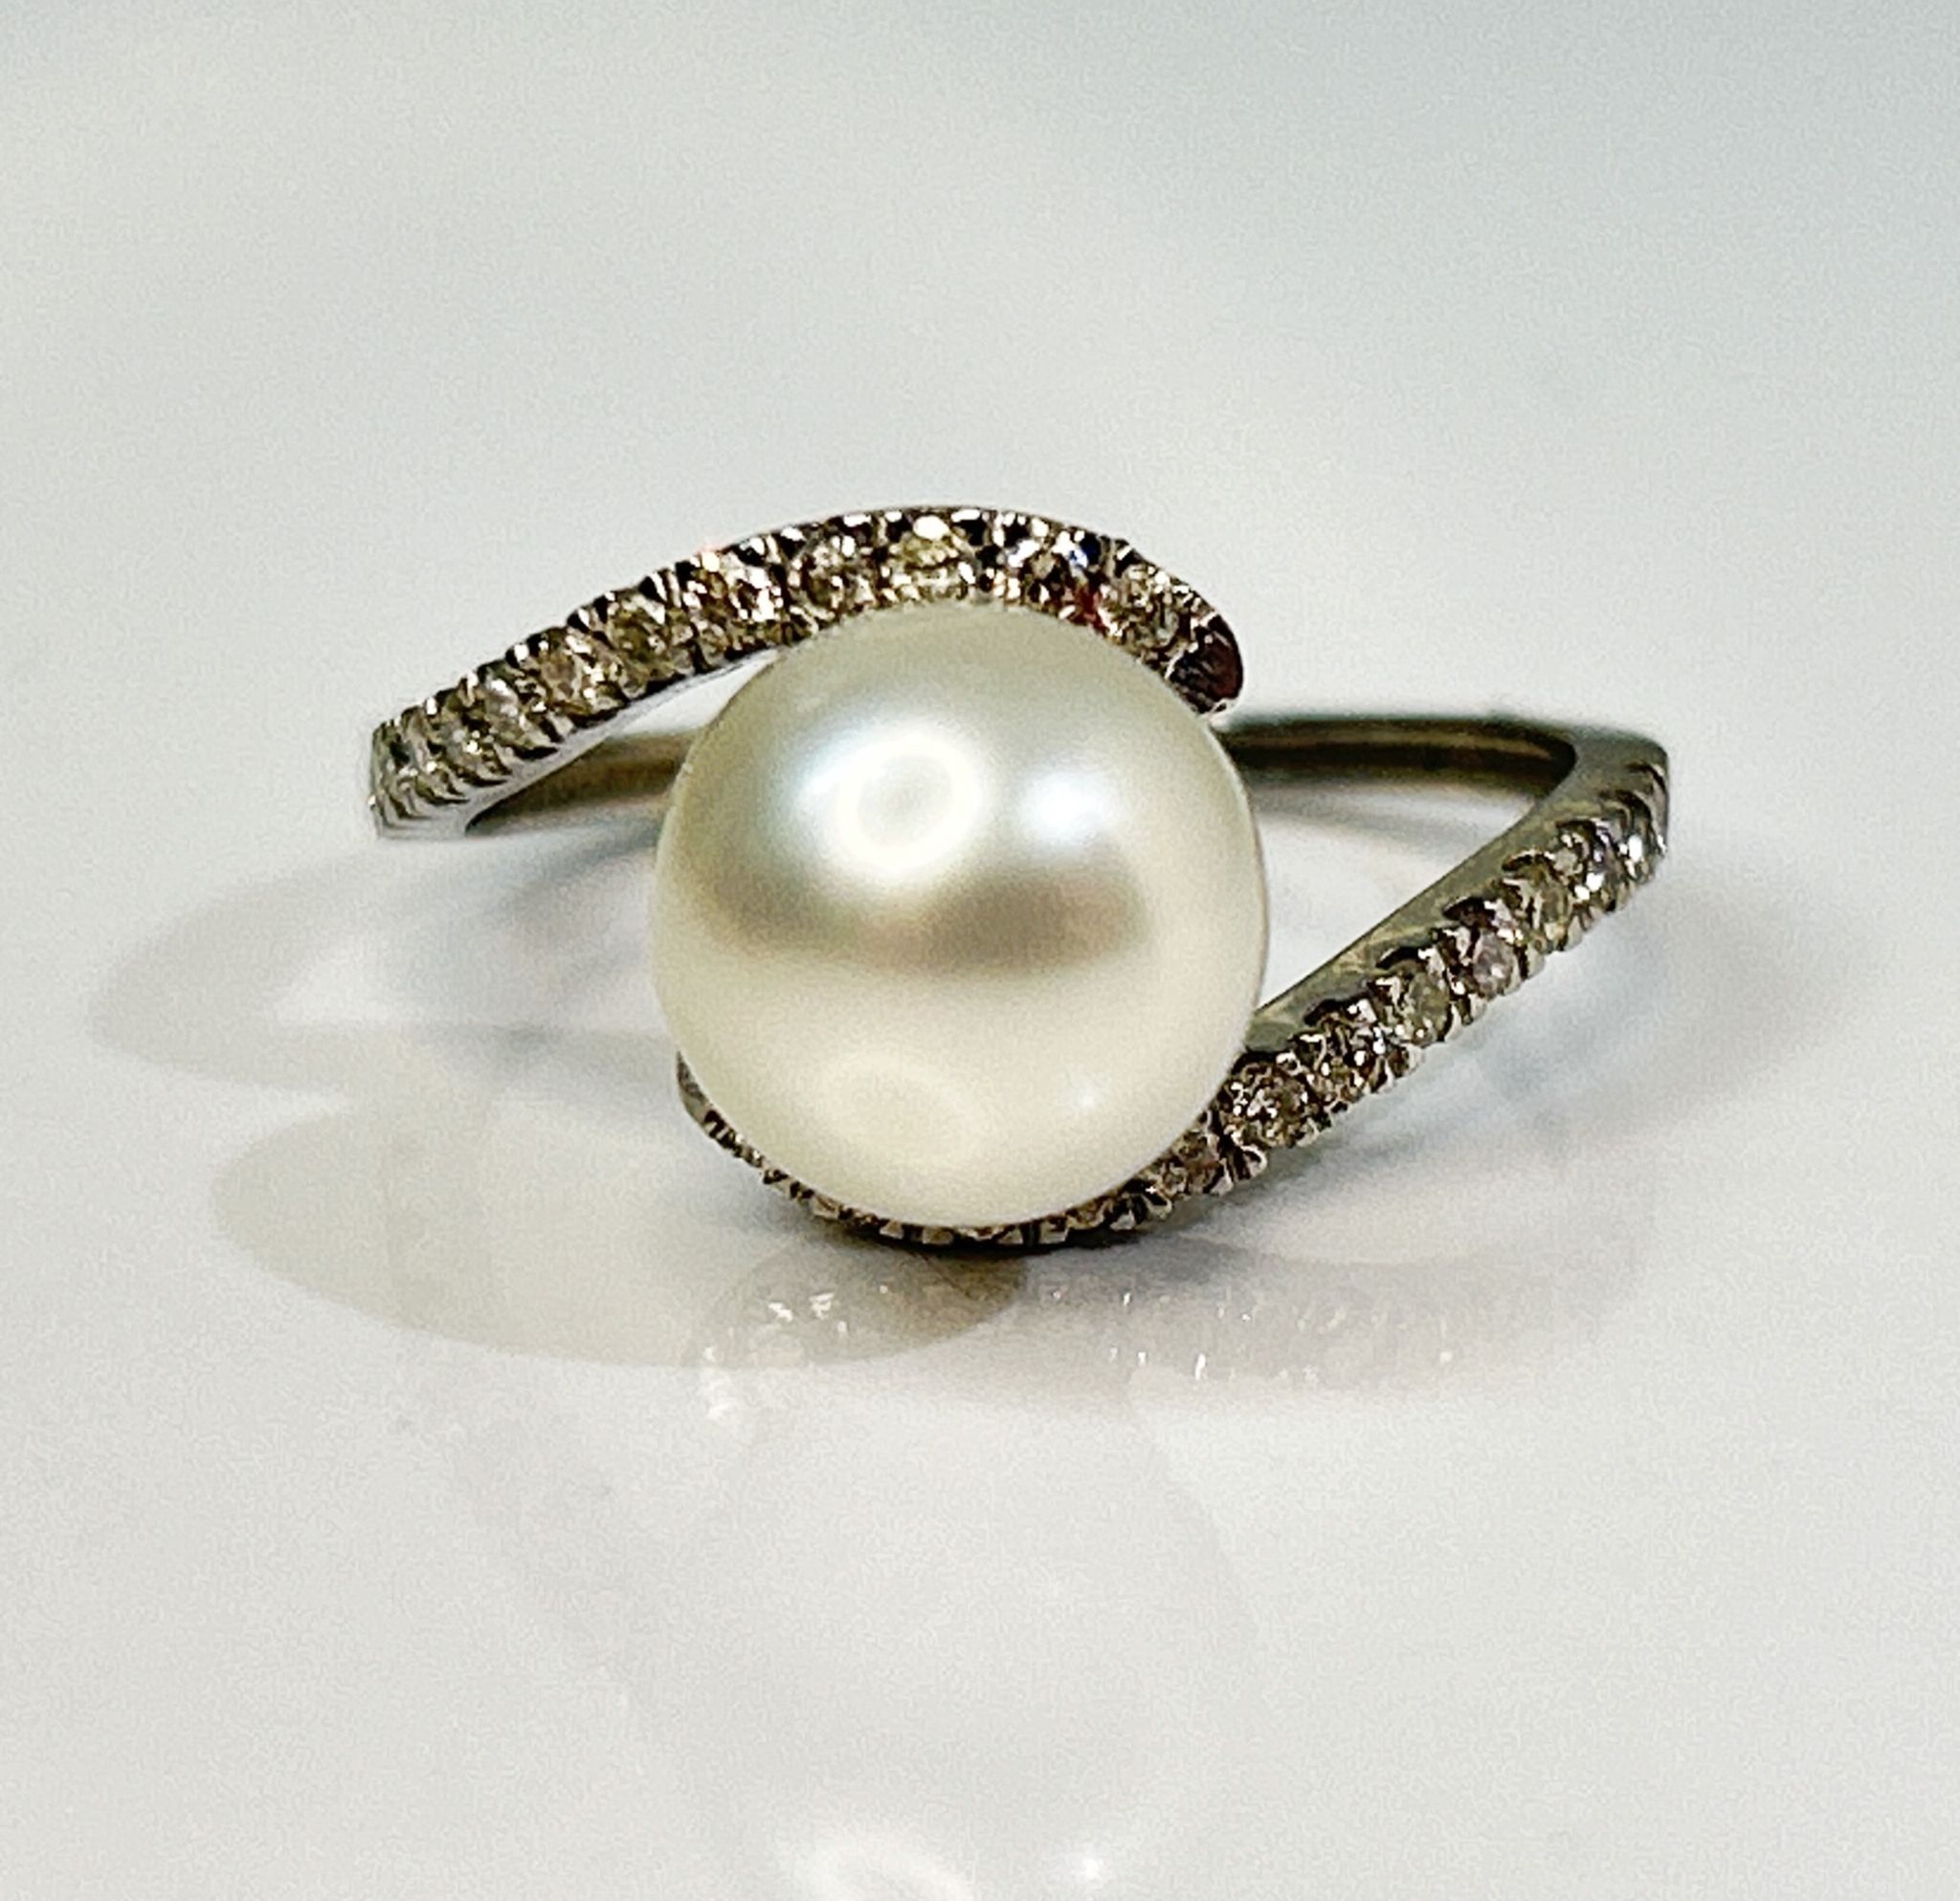 Beautiful 5.12 CT South Sea Pearl With Diamonds & Platinum Ring - Image 2 of 6